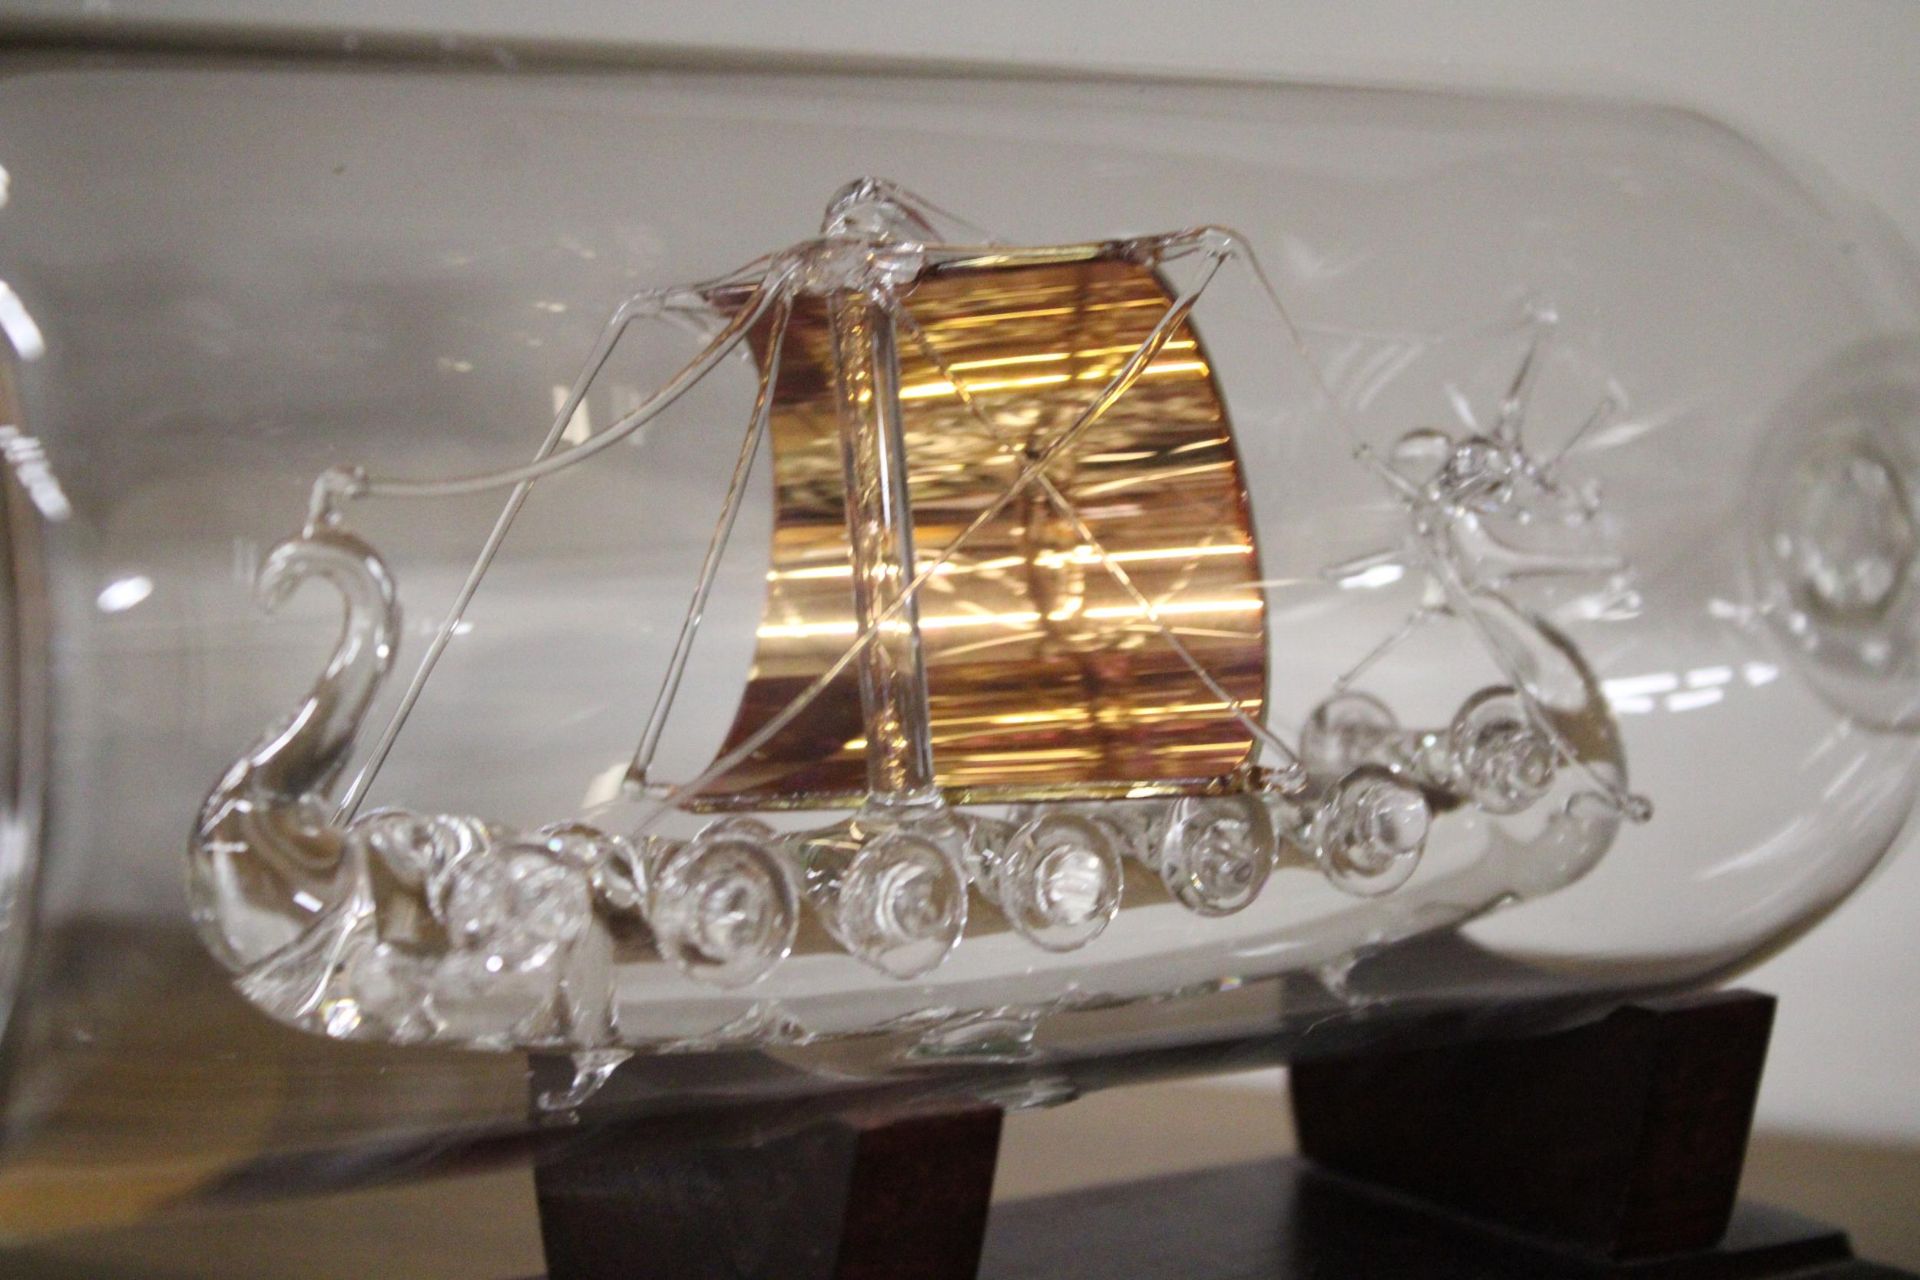 A GLASS MODEL OF A VIKING LONGSHIP IN A BOTTLE - Image 5 of 5